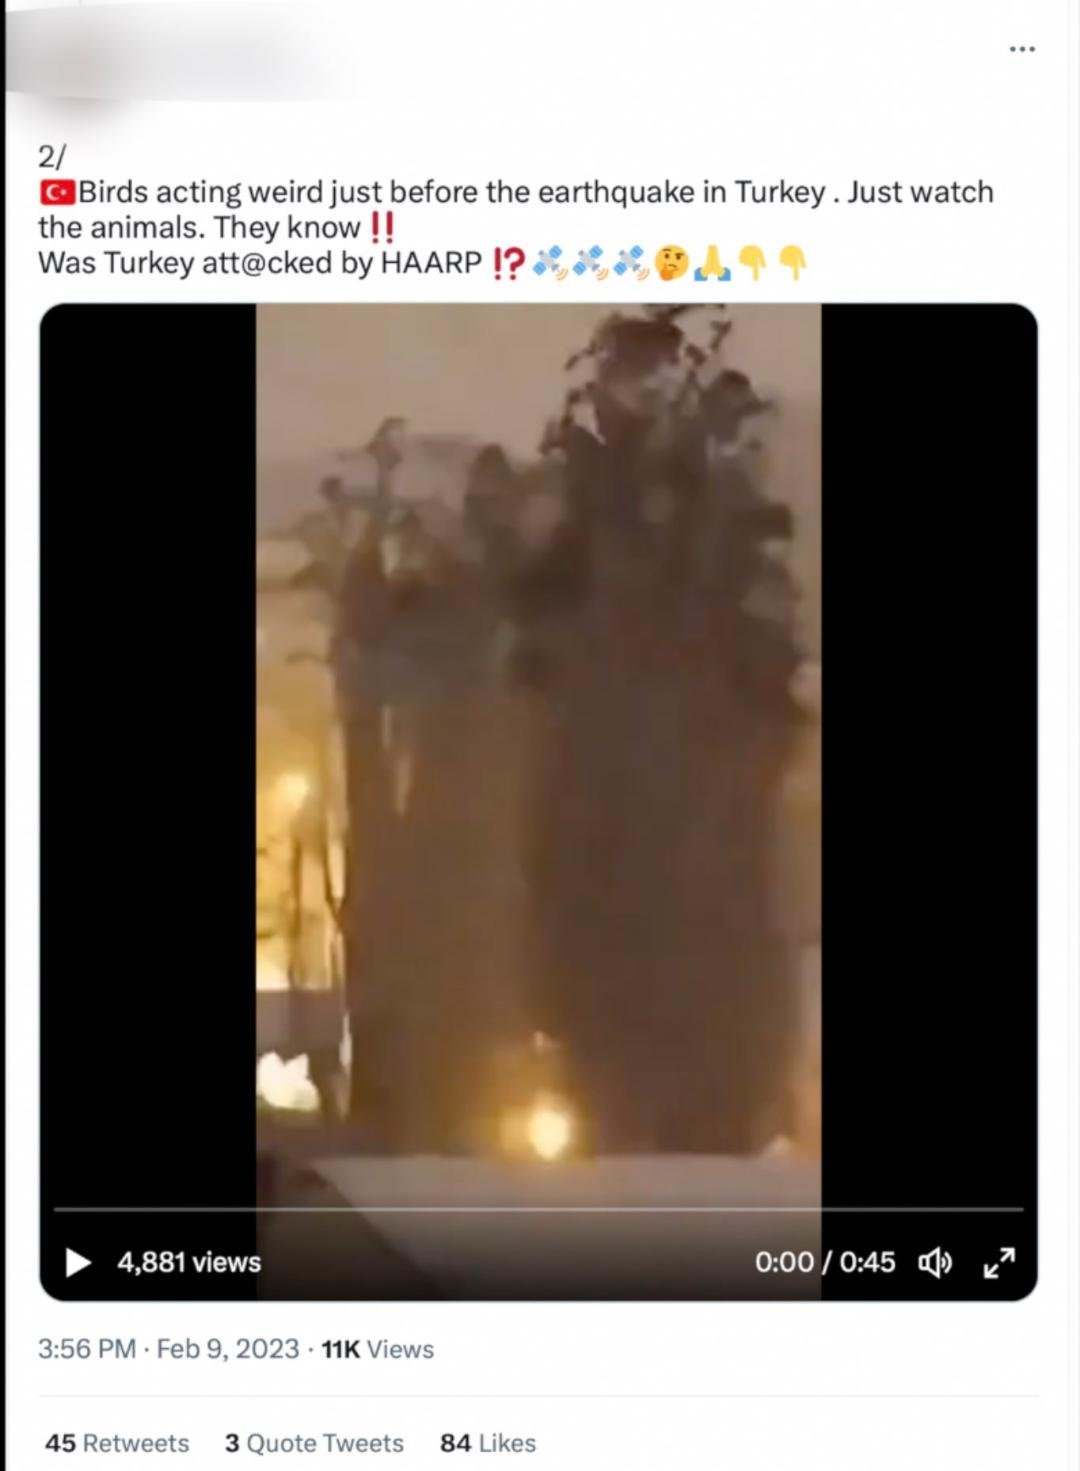 Screenshot of a tweet featuring a video of birds and falsely claiming that the animals were 'acting weird' before the earthquake and asking if Turkey 'was attacked by HAARP?'.